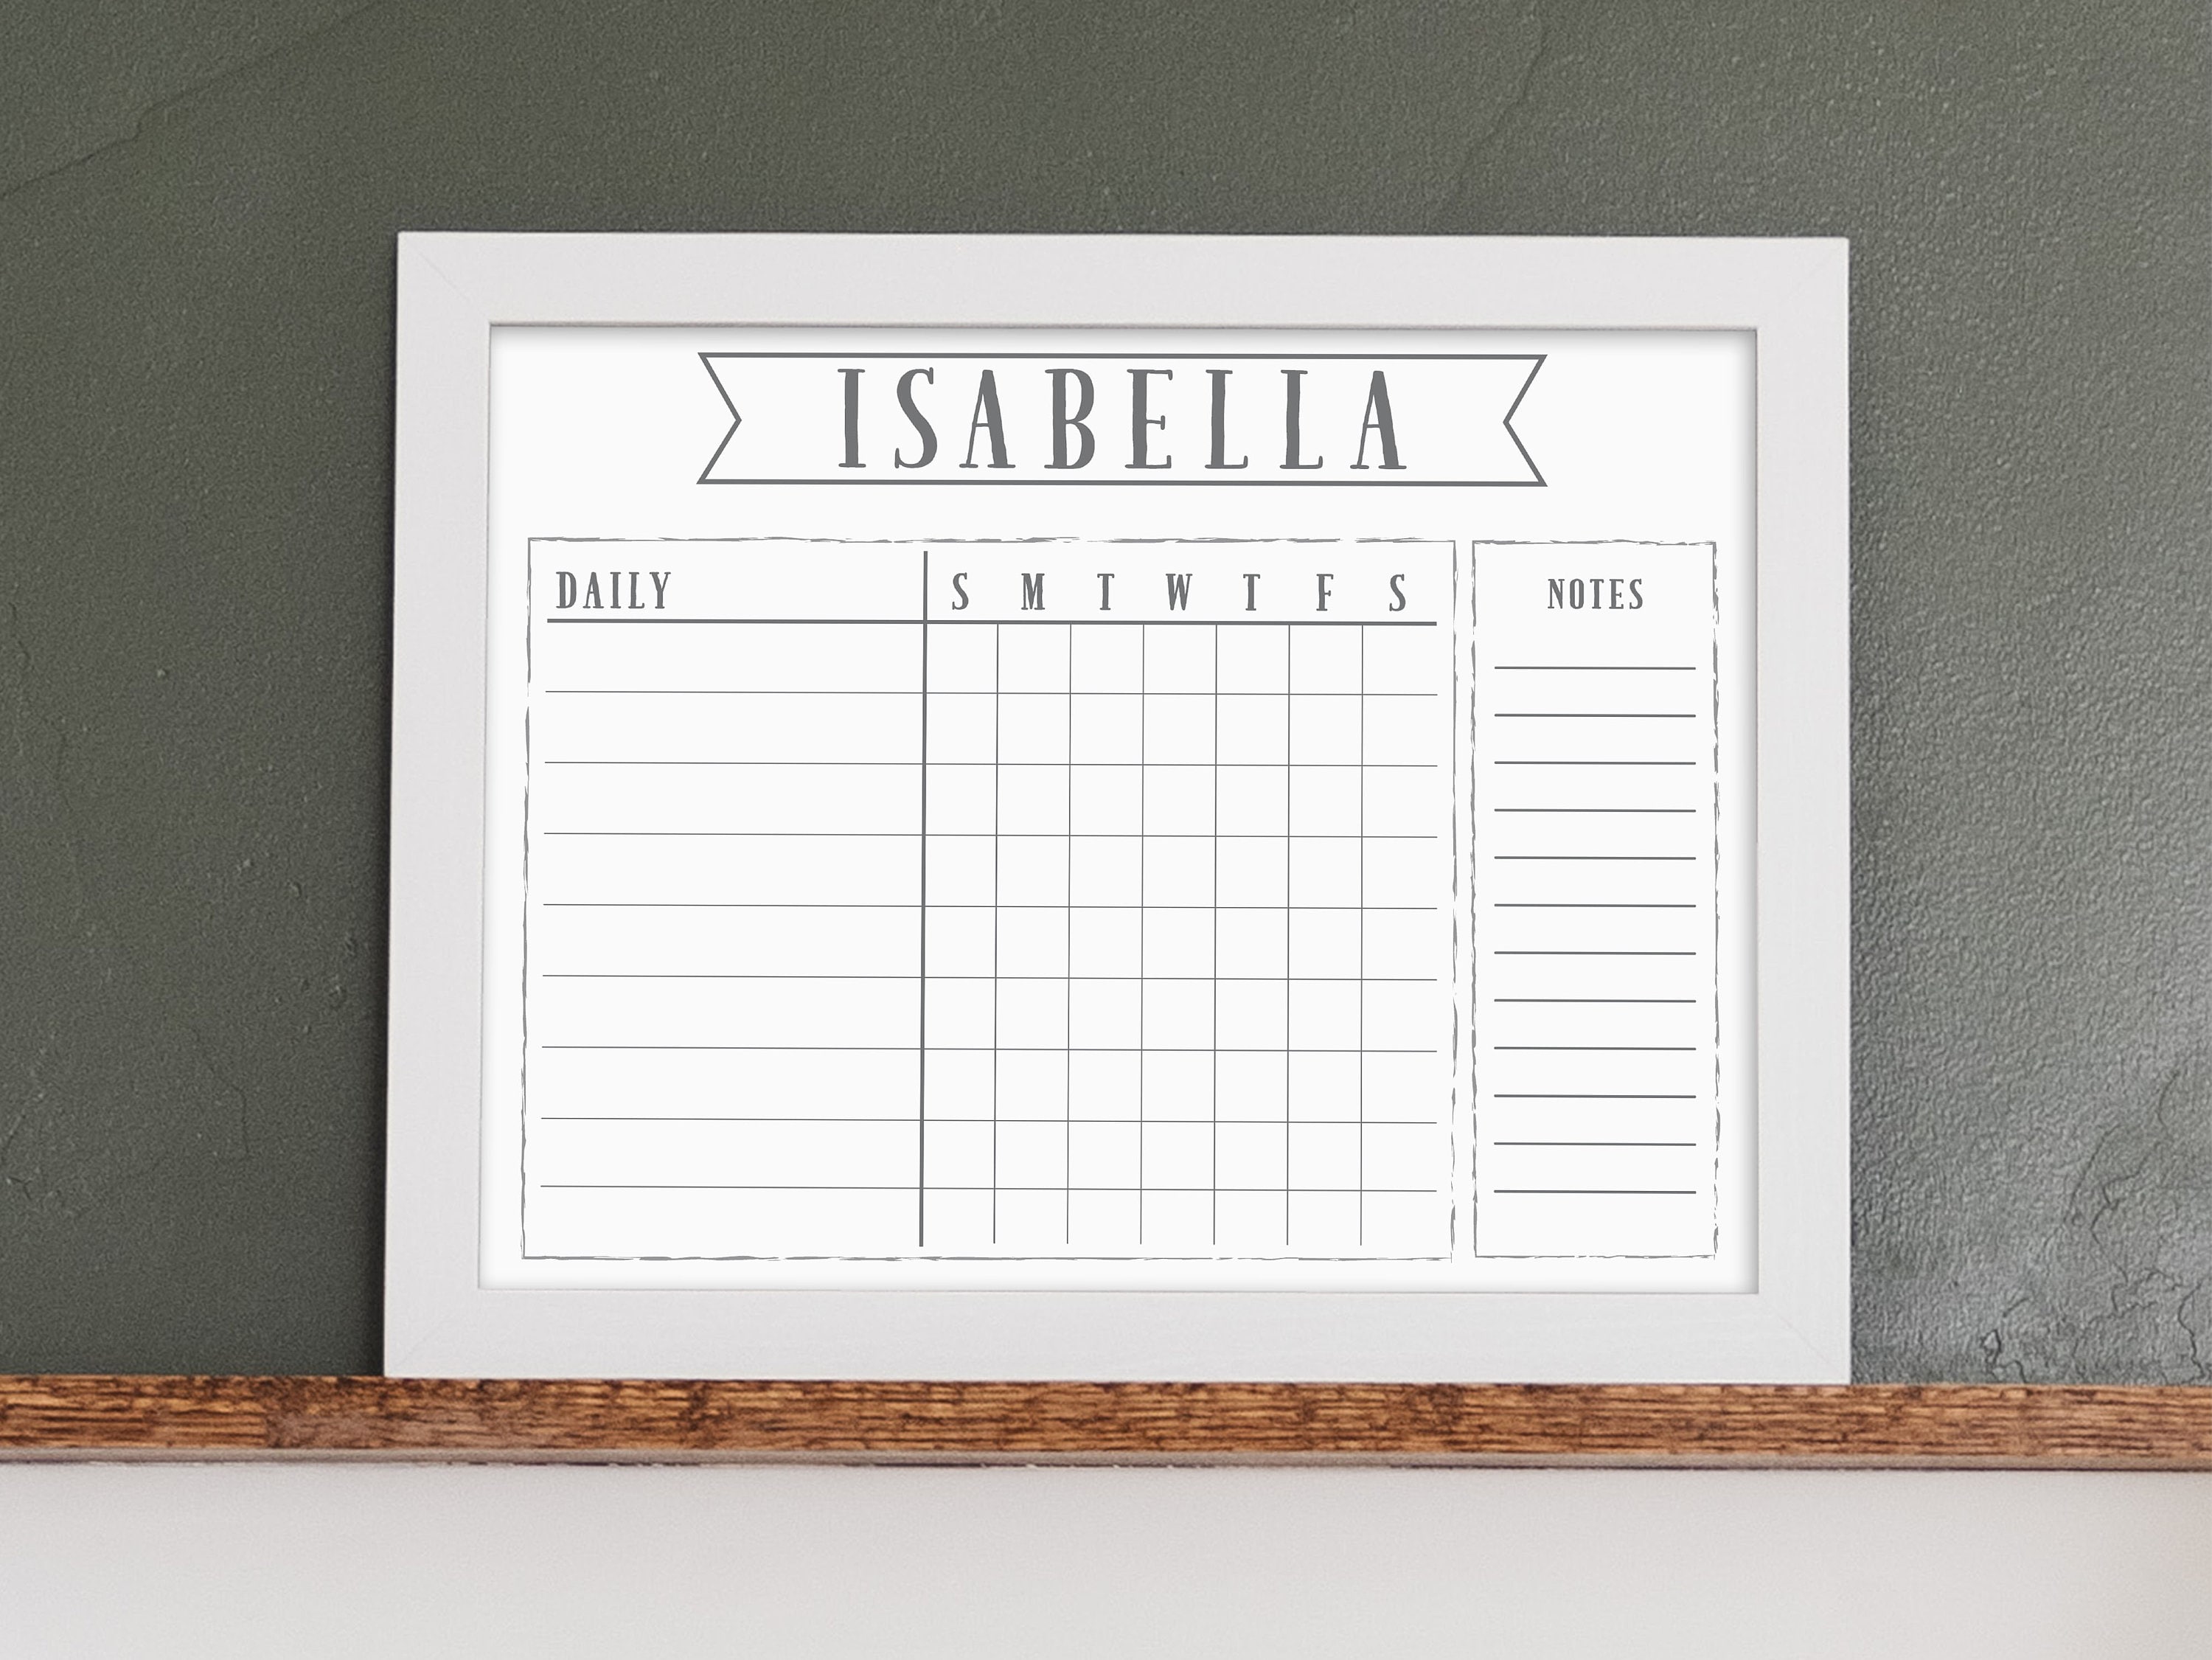 Calendar, Dry Erase Chalkboard Calendar Personalized for Your Family Small  18x24 or Large 24x36 Calendar, Est. Year, Custom Bottom Boxes 